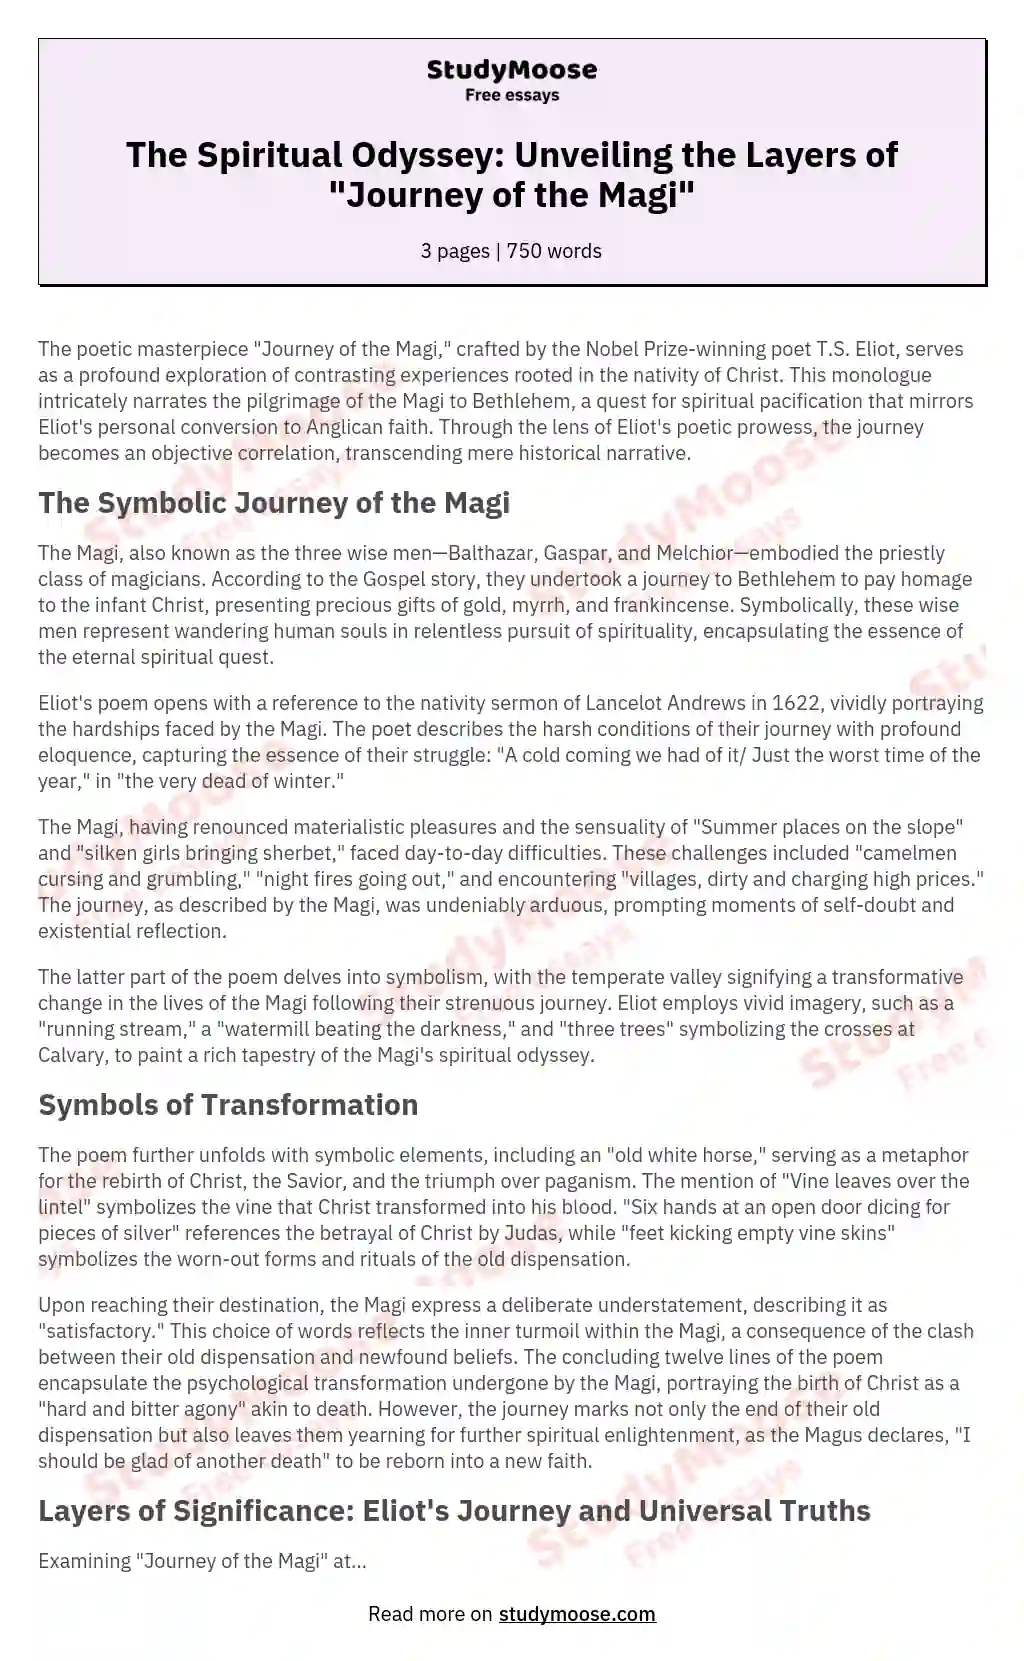 The Spiritual Odyssey: Unveiling the Layers of "Journey of the Magi" essay